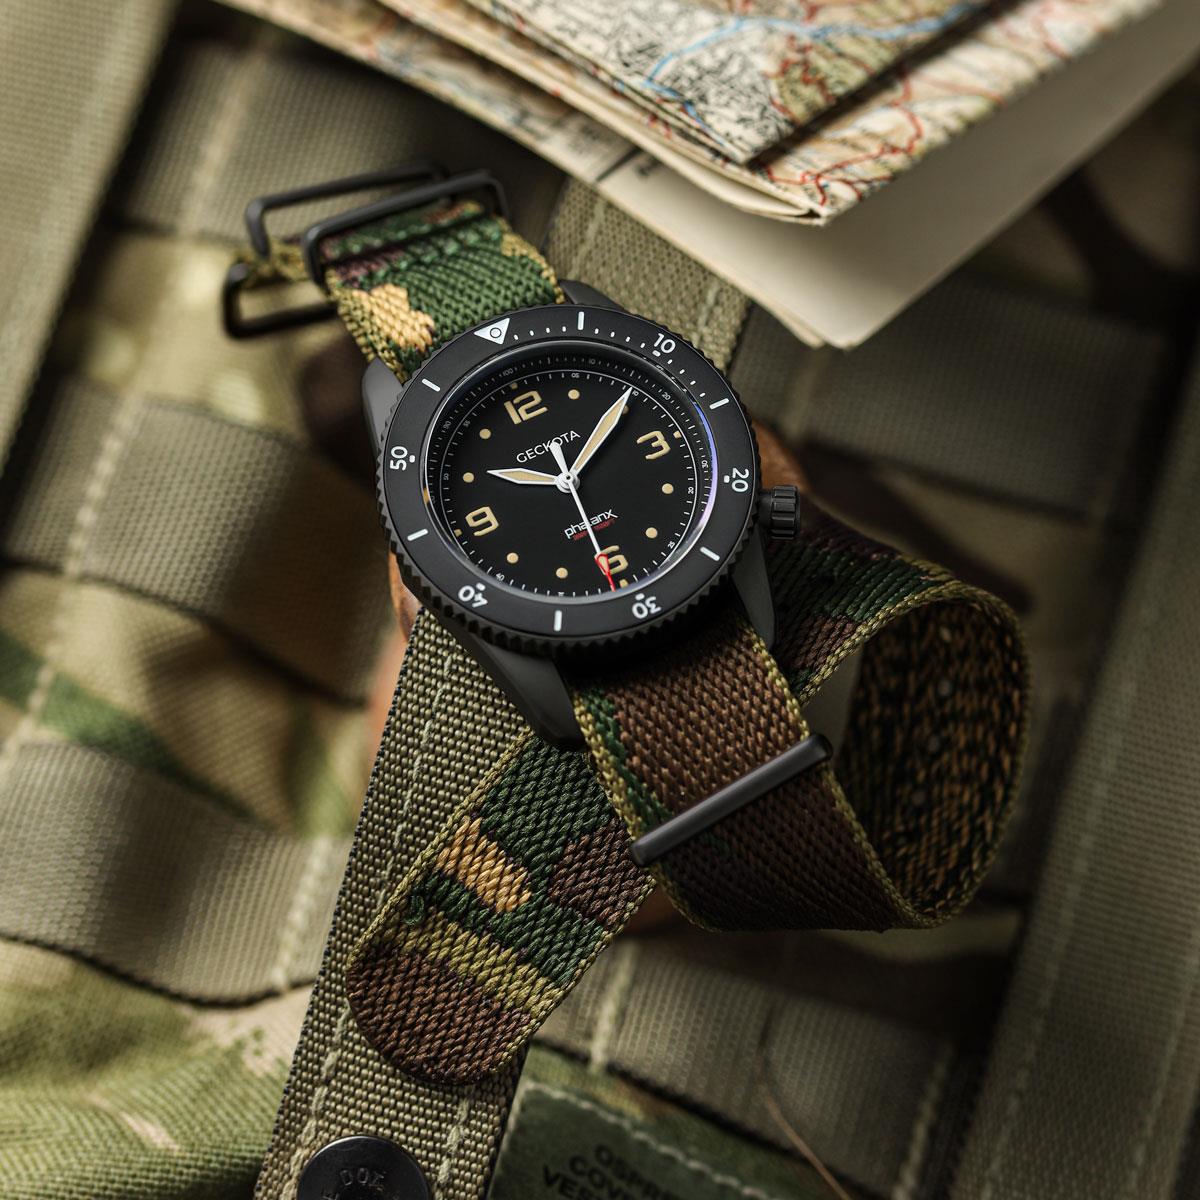 Woven camouflage NATO watch strap with PVD black metal fittings